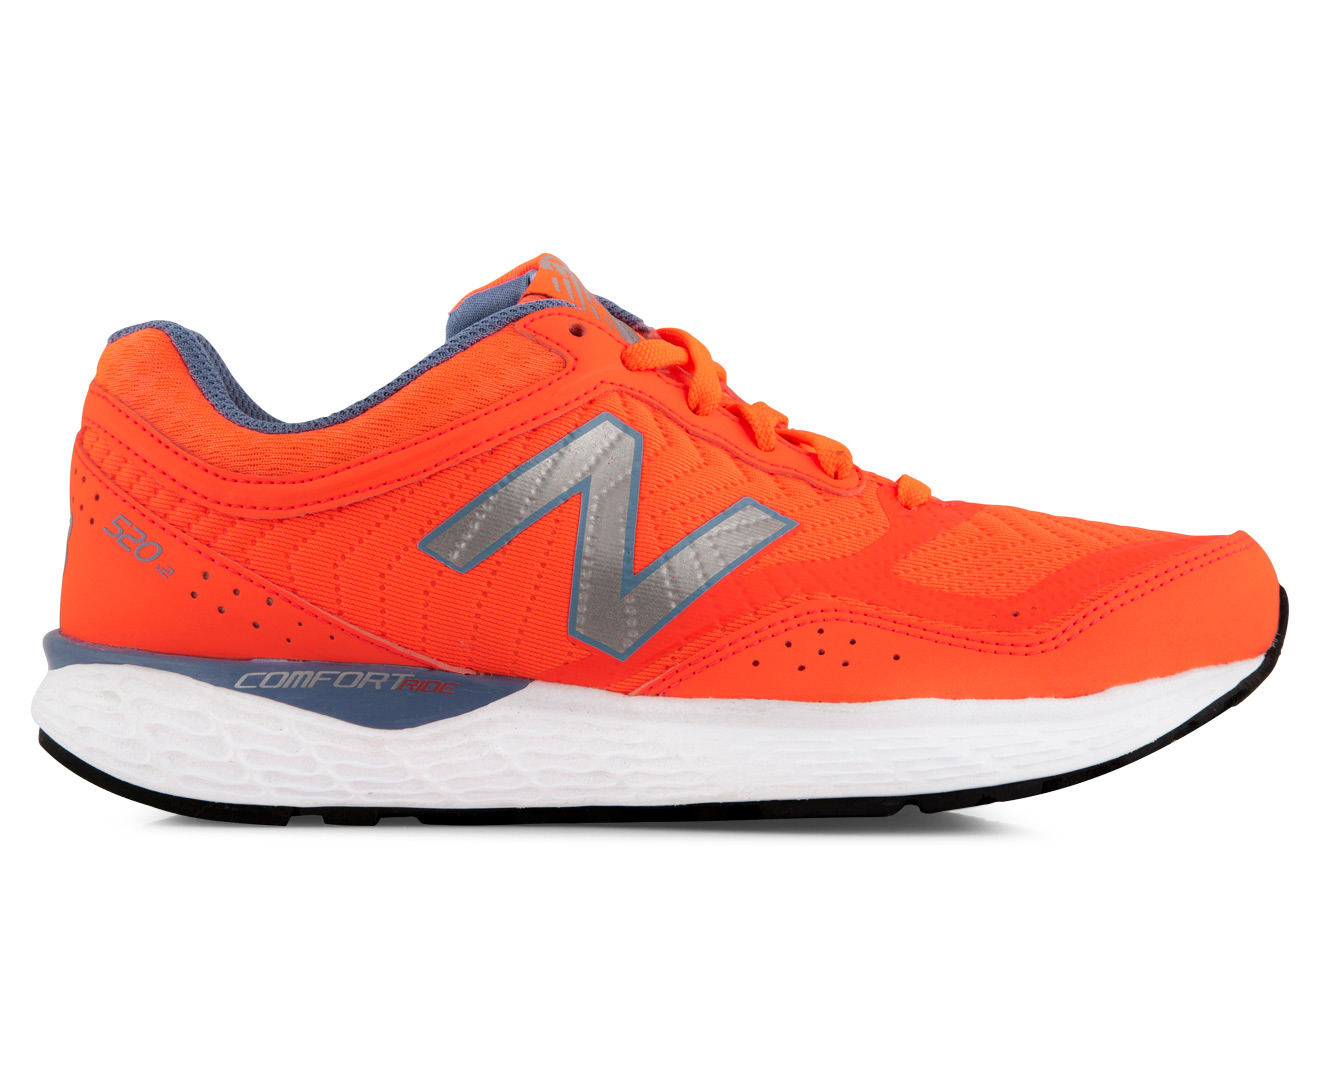 New Balance Women's 520v2 Wide Fit Running Shoe - Coral | Great daily ...